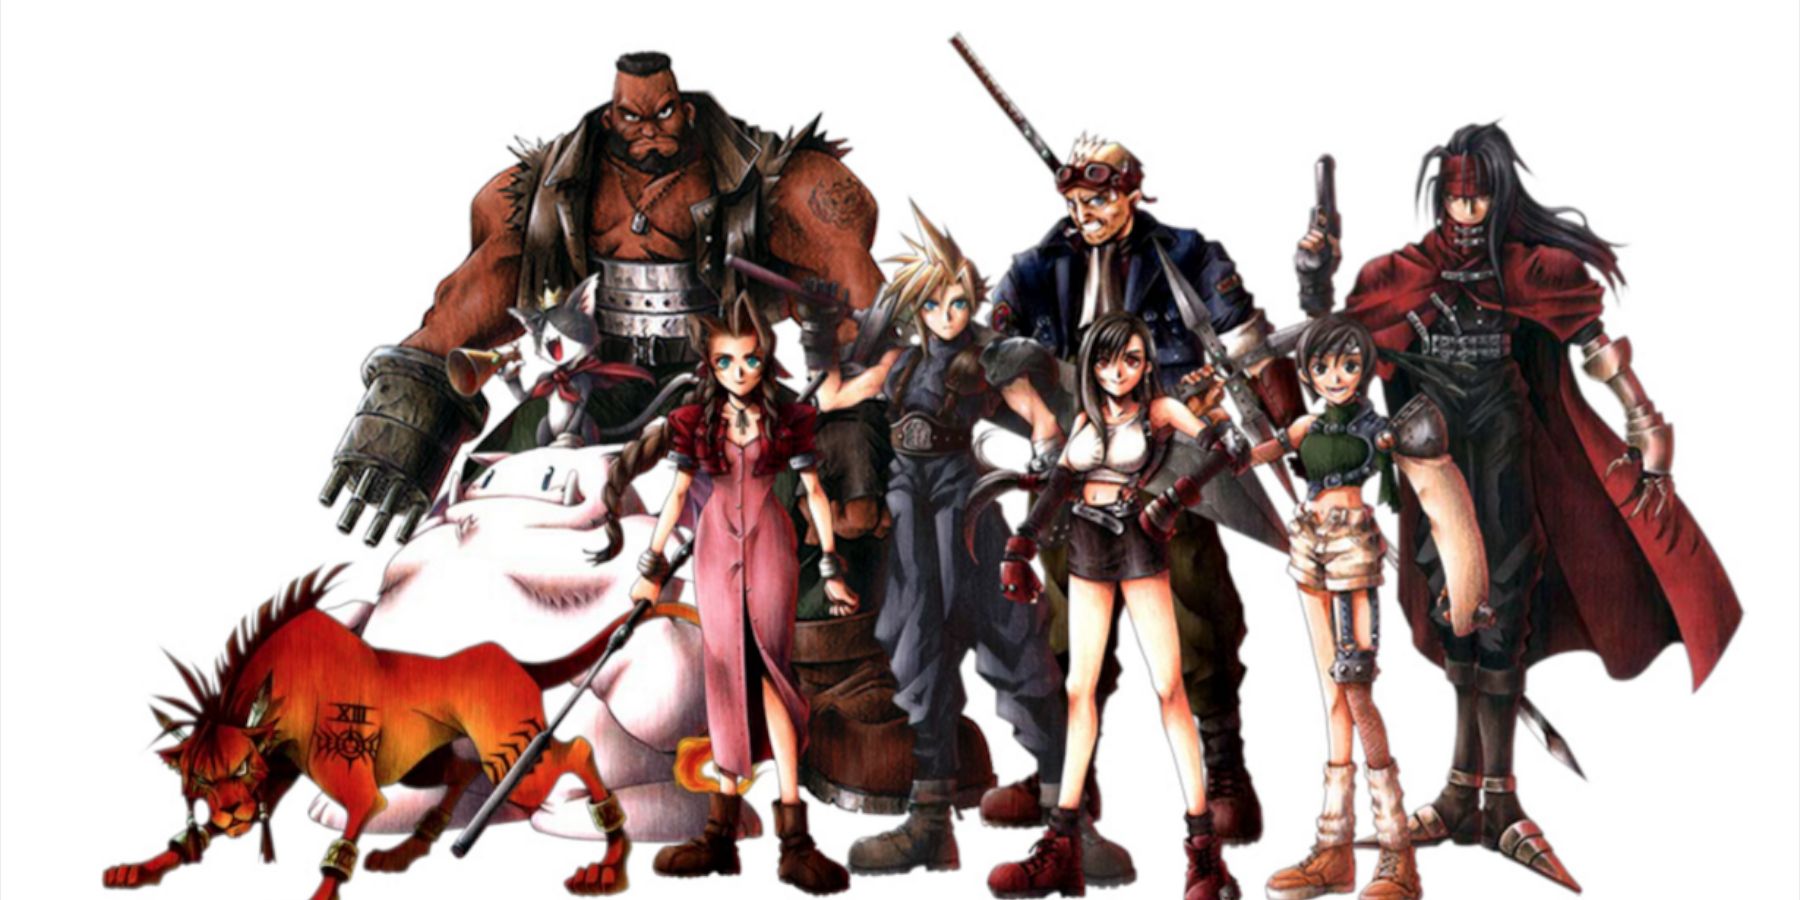 Artwork of all nine playable characters from Final Fantasy 7 standing together.